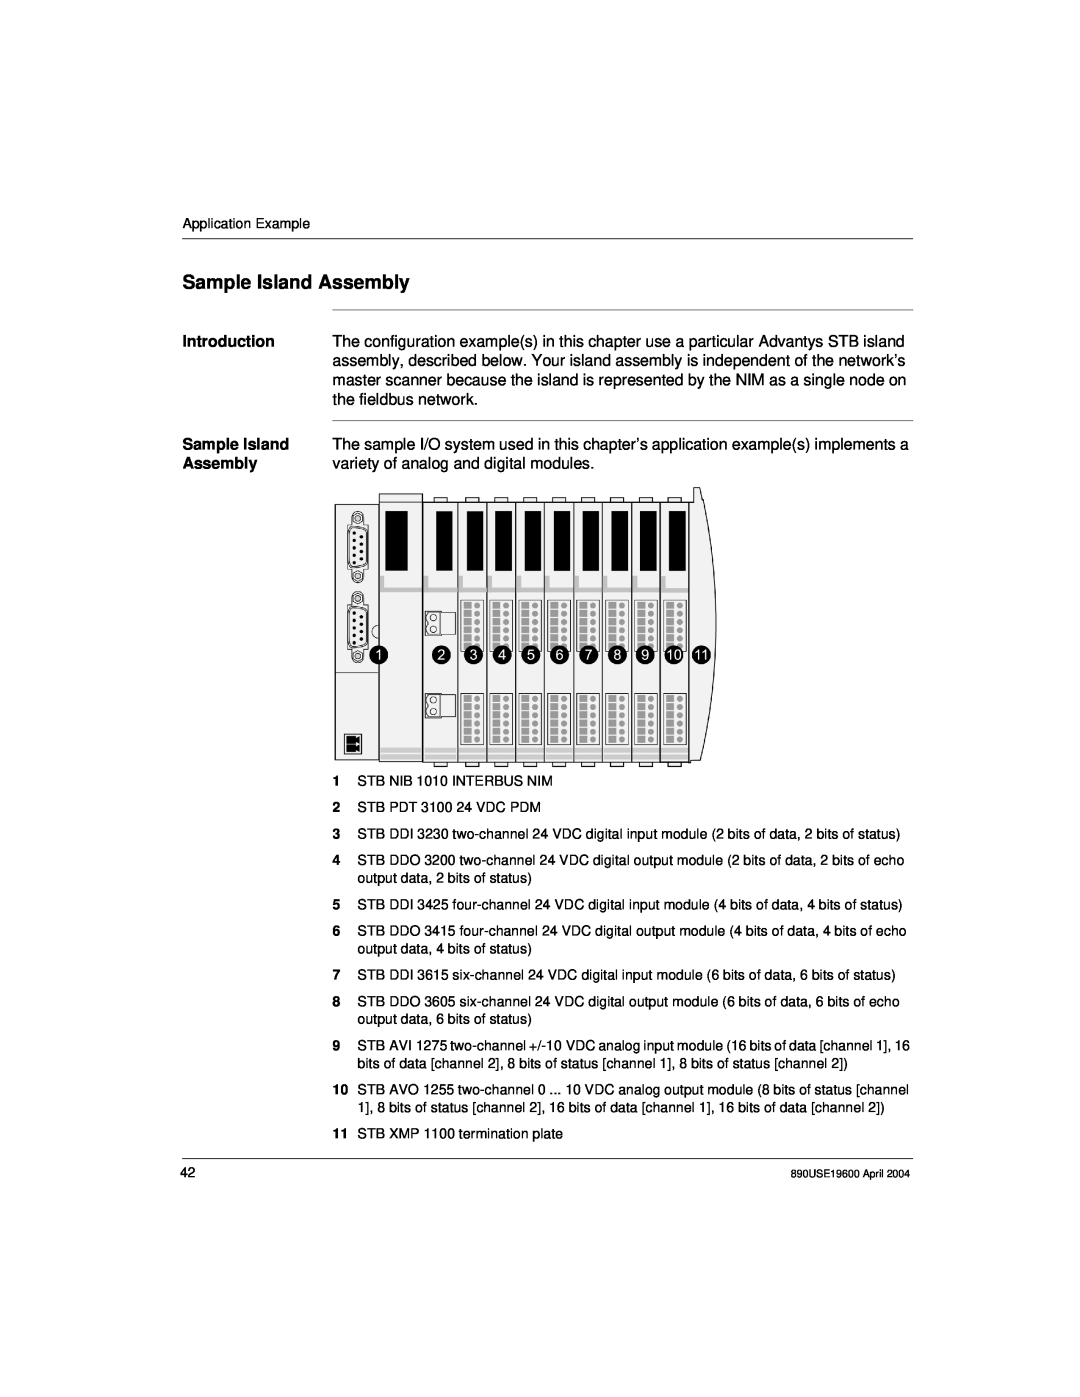 Schneider Electric 890USE19600 Version 1.0 manual Sample Island Assembly, the fieldbus network 